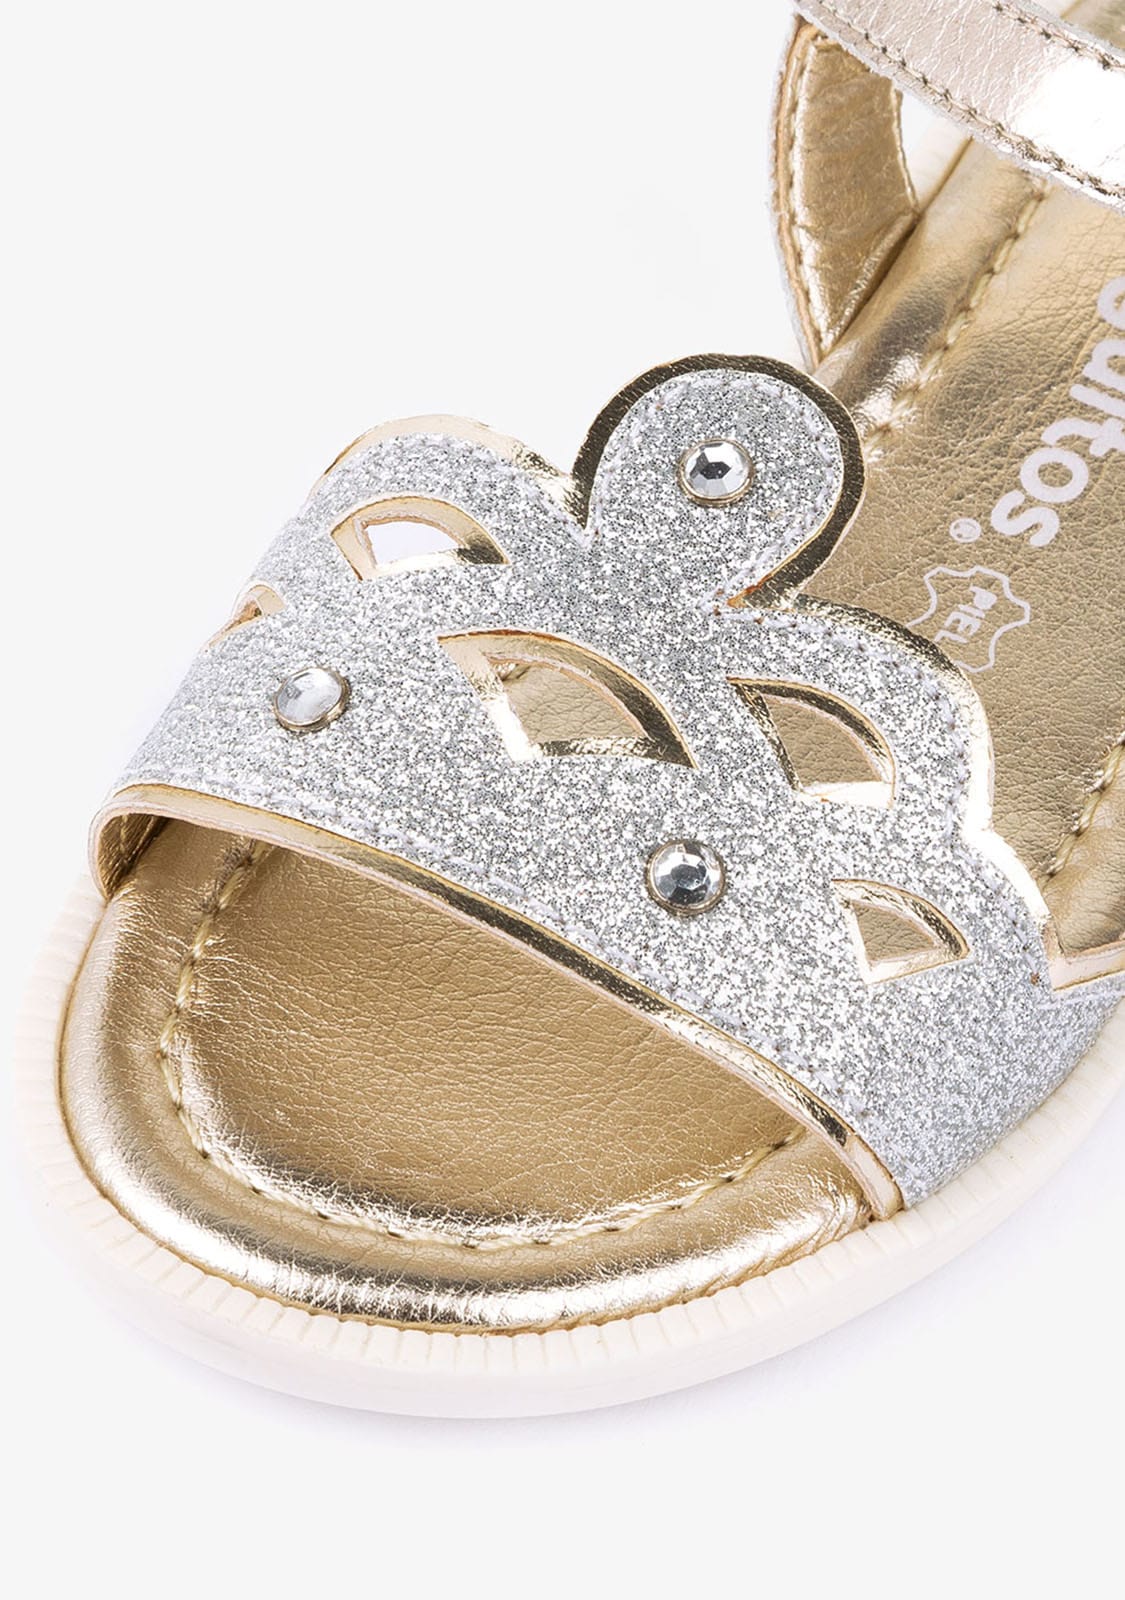 CONGUITOS Shoes Girl's Crown Silver Leather Sandals